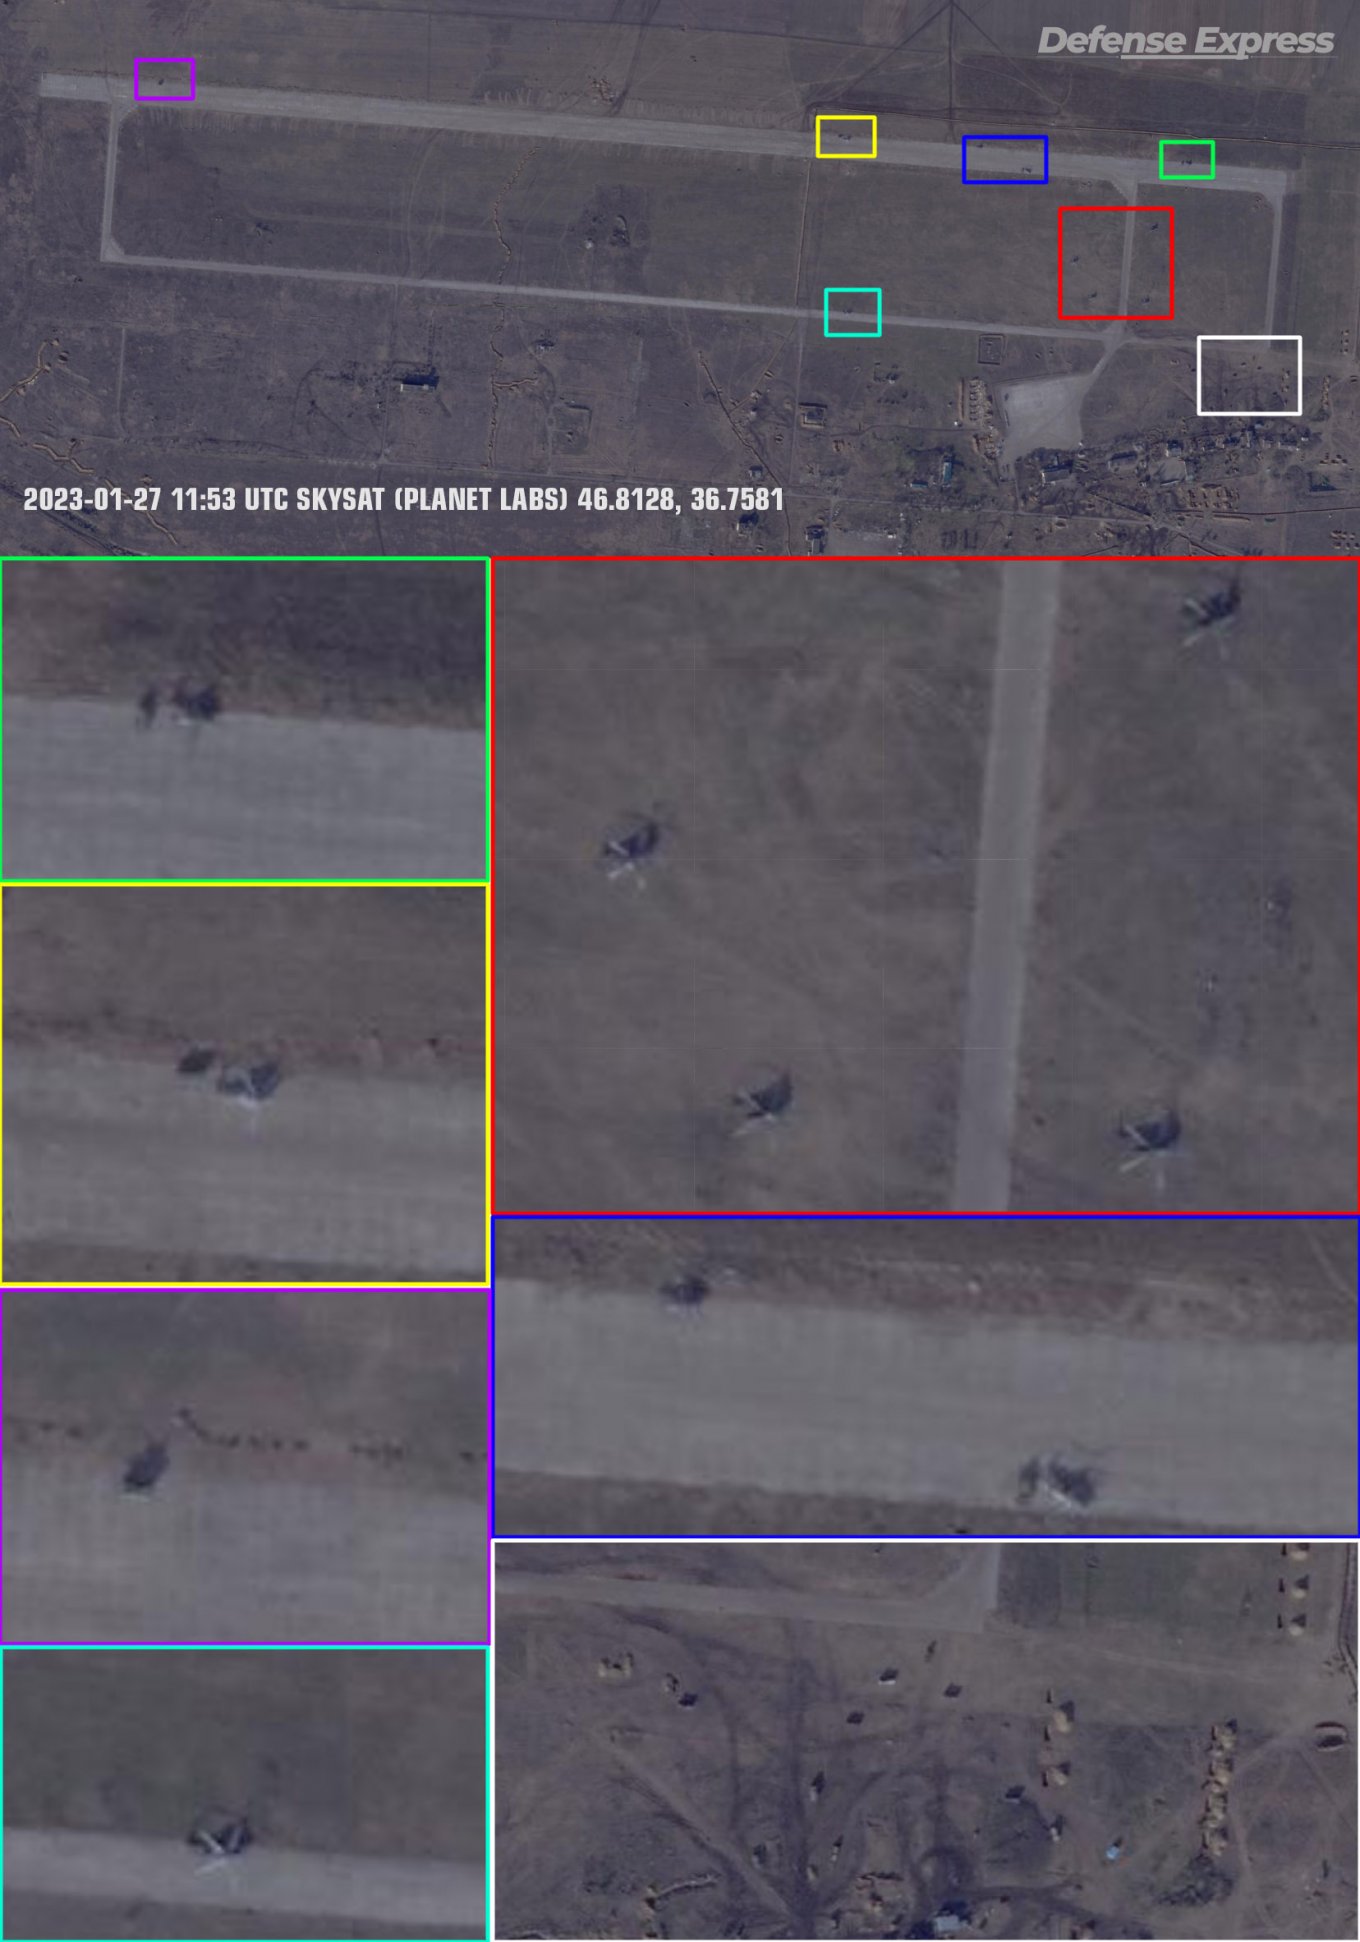 Russians Preparing the Airfield In Occupied Berdyansk For a Circular Defense: Three Rows of Wagner Pyramids And 15 Km of Fortifications, Defense Express, war in Ukraine, Russian-Ukrainian war